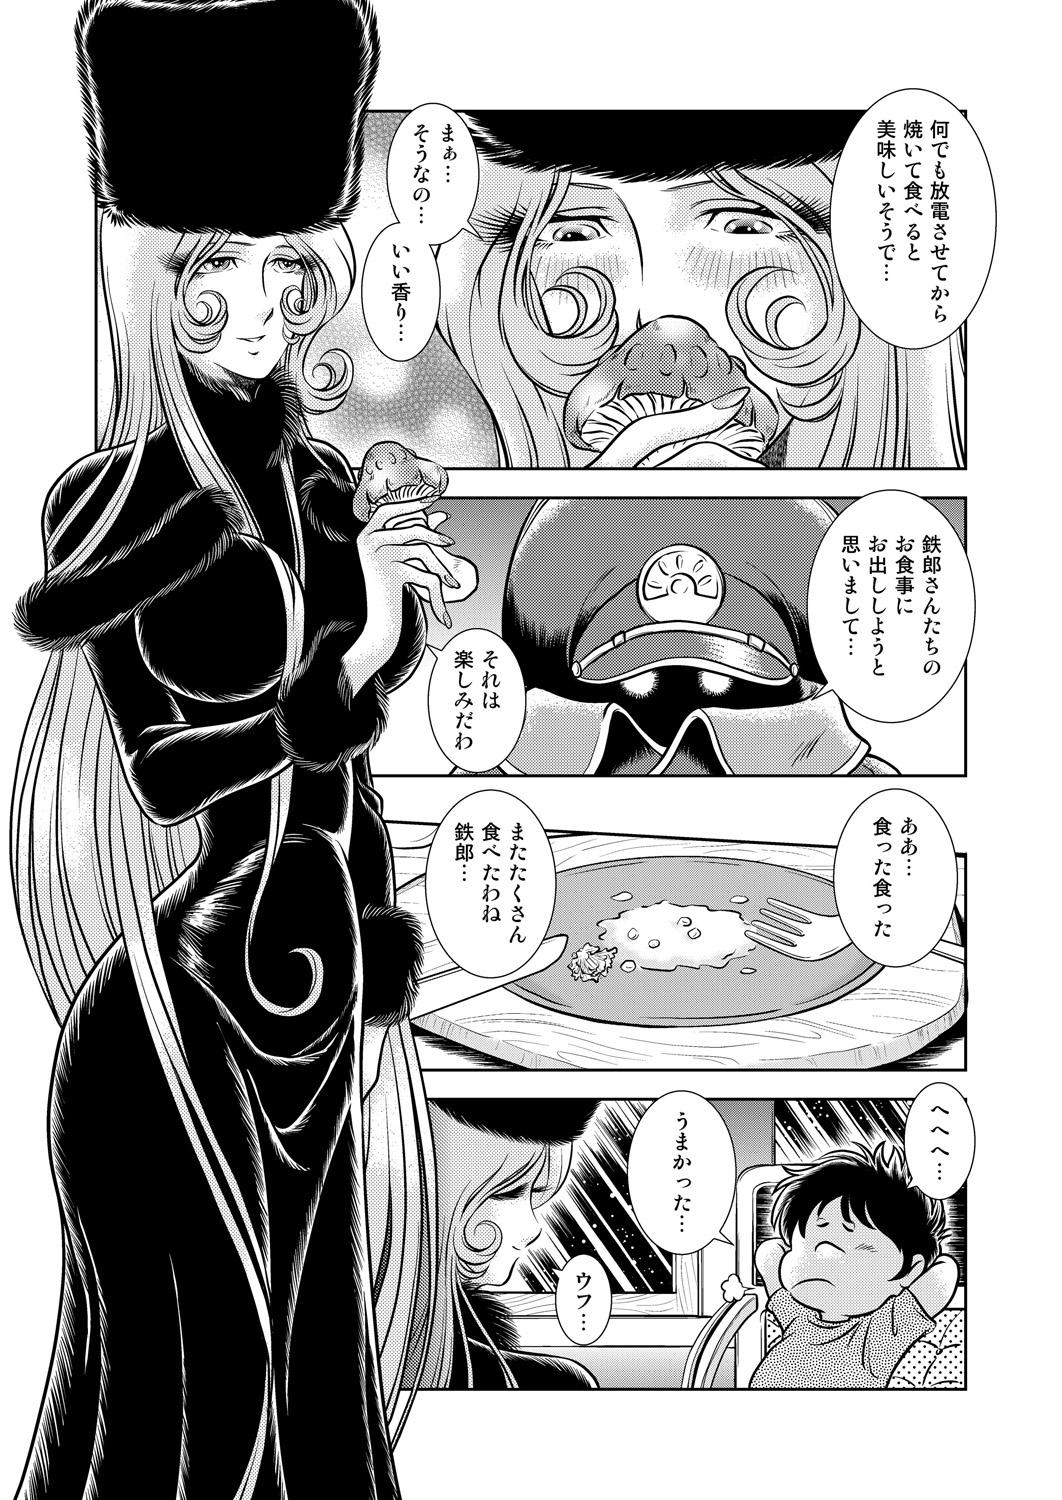 Pigtails Maetel Story 9 - Galaxy express 999 Worship - Page 7